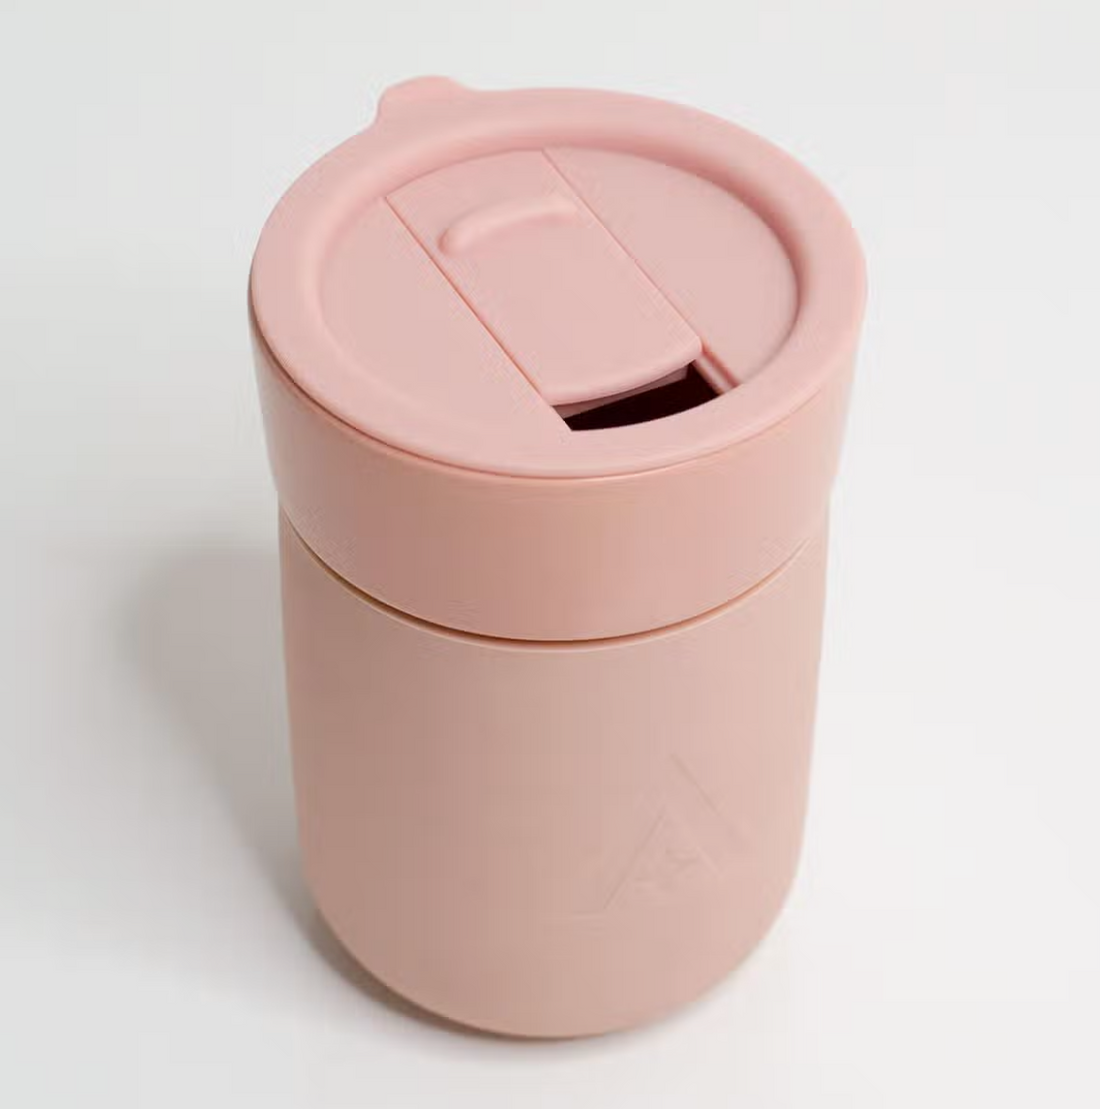 Ceramic Carry Cup - Blush Pink